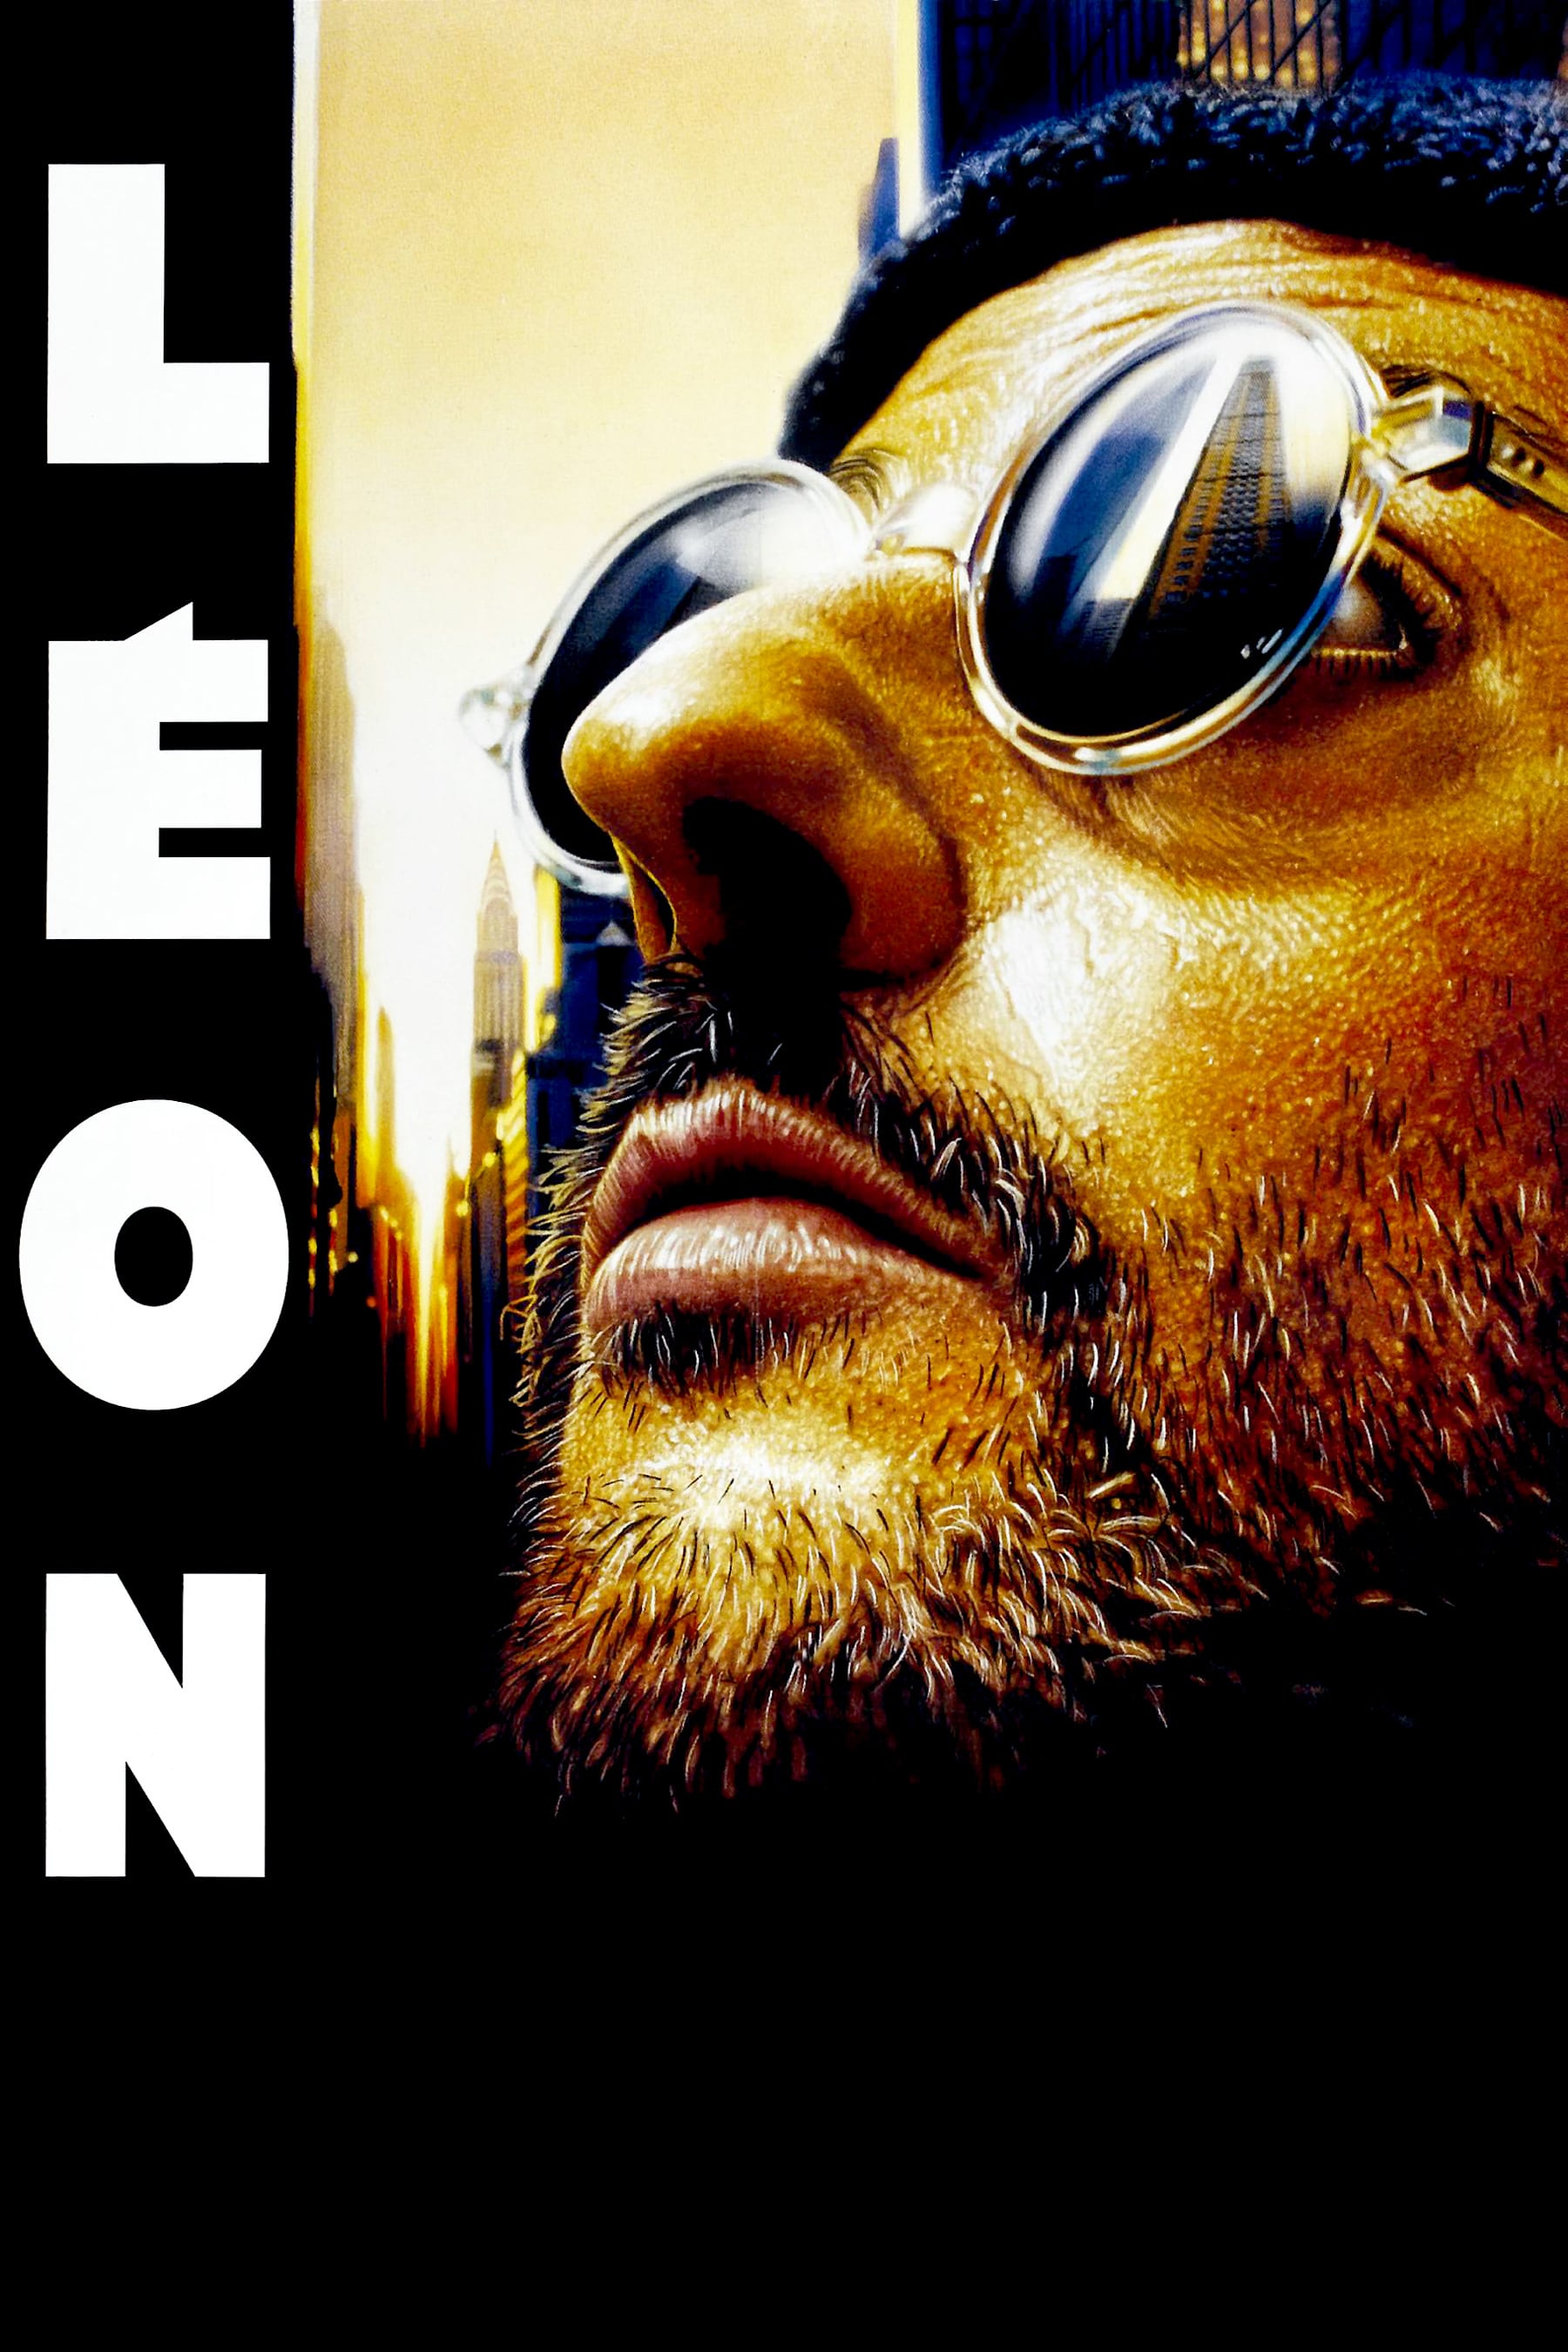 download leon the professional